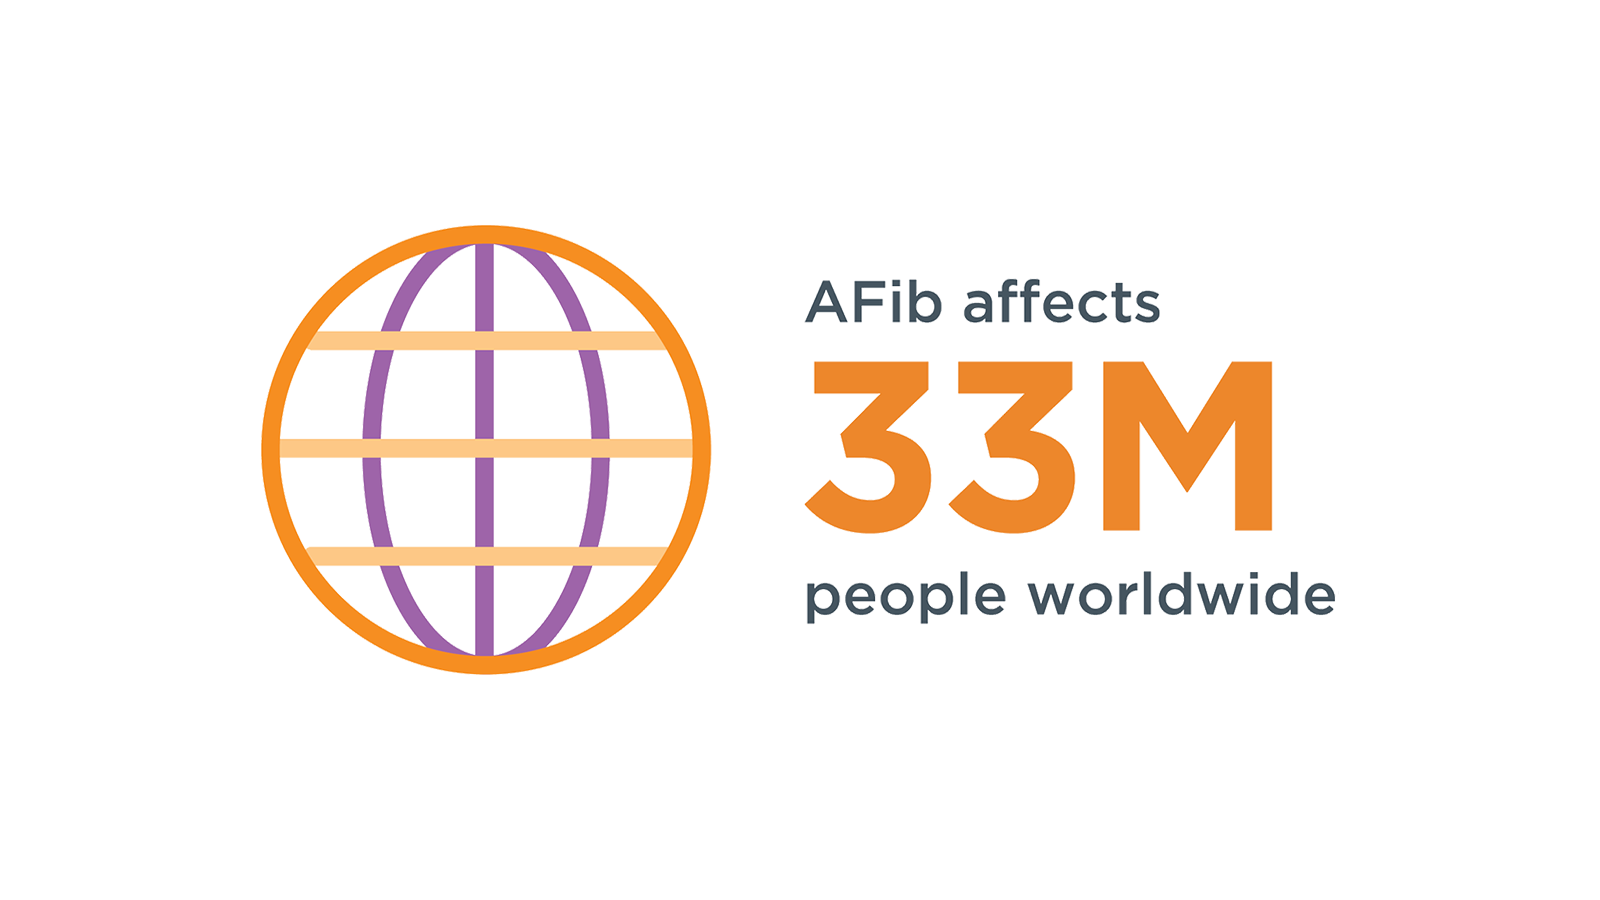 Infographic: Is AFib a common heart condition? AFib affects 33 million people worldwide.